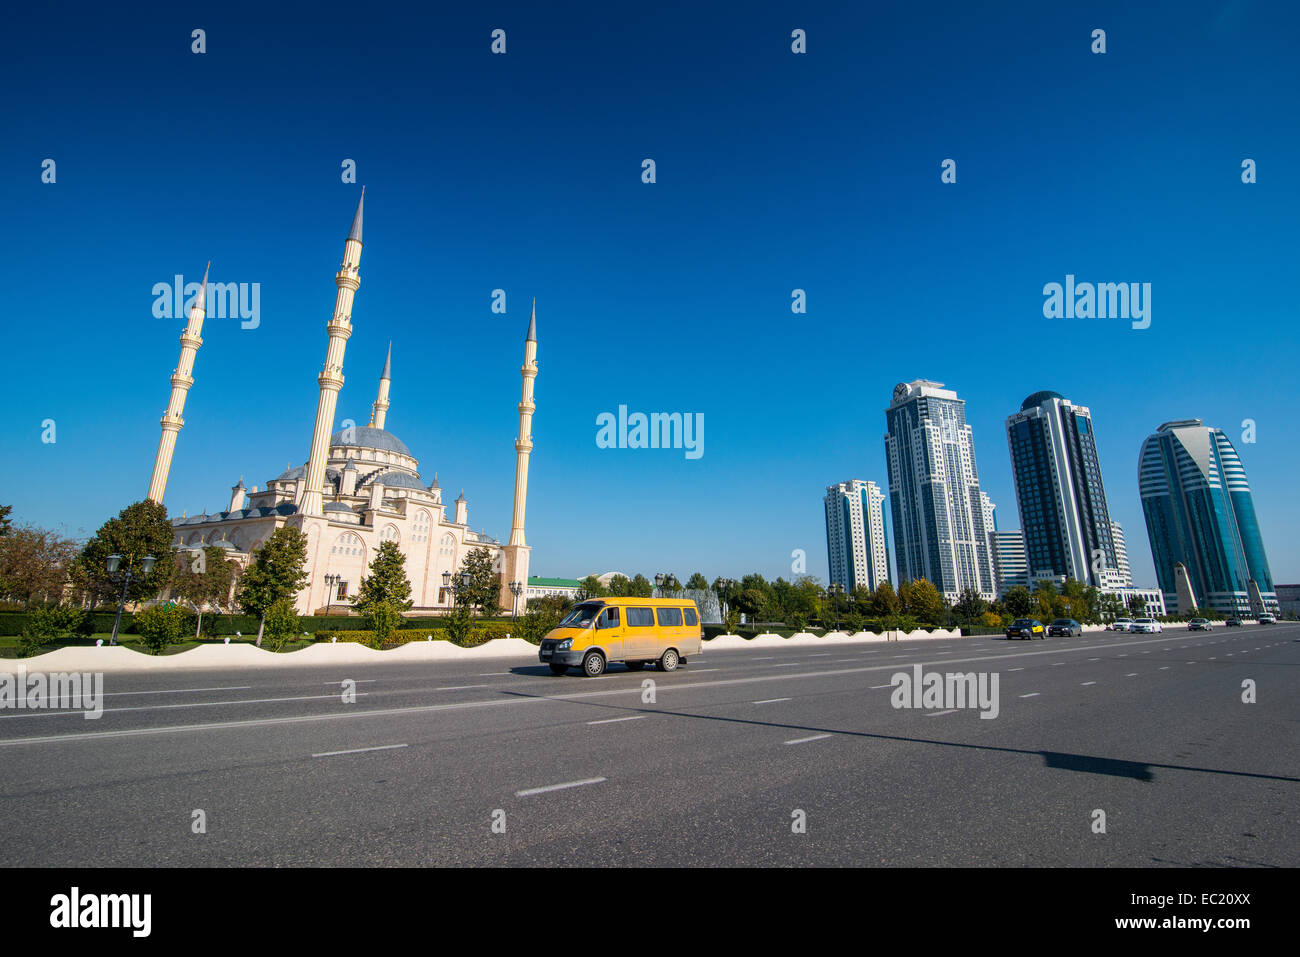 Akhmad Kadyrov Mosque and modern business buildings in Grozny, Chechnya, Caucasus, Russia Stock Photo